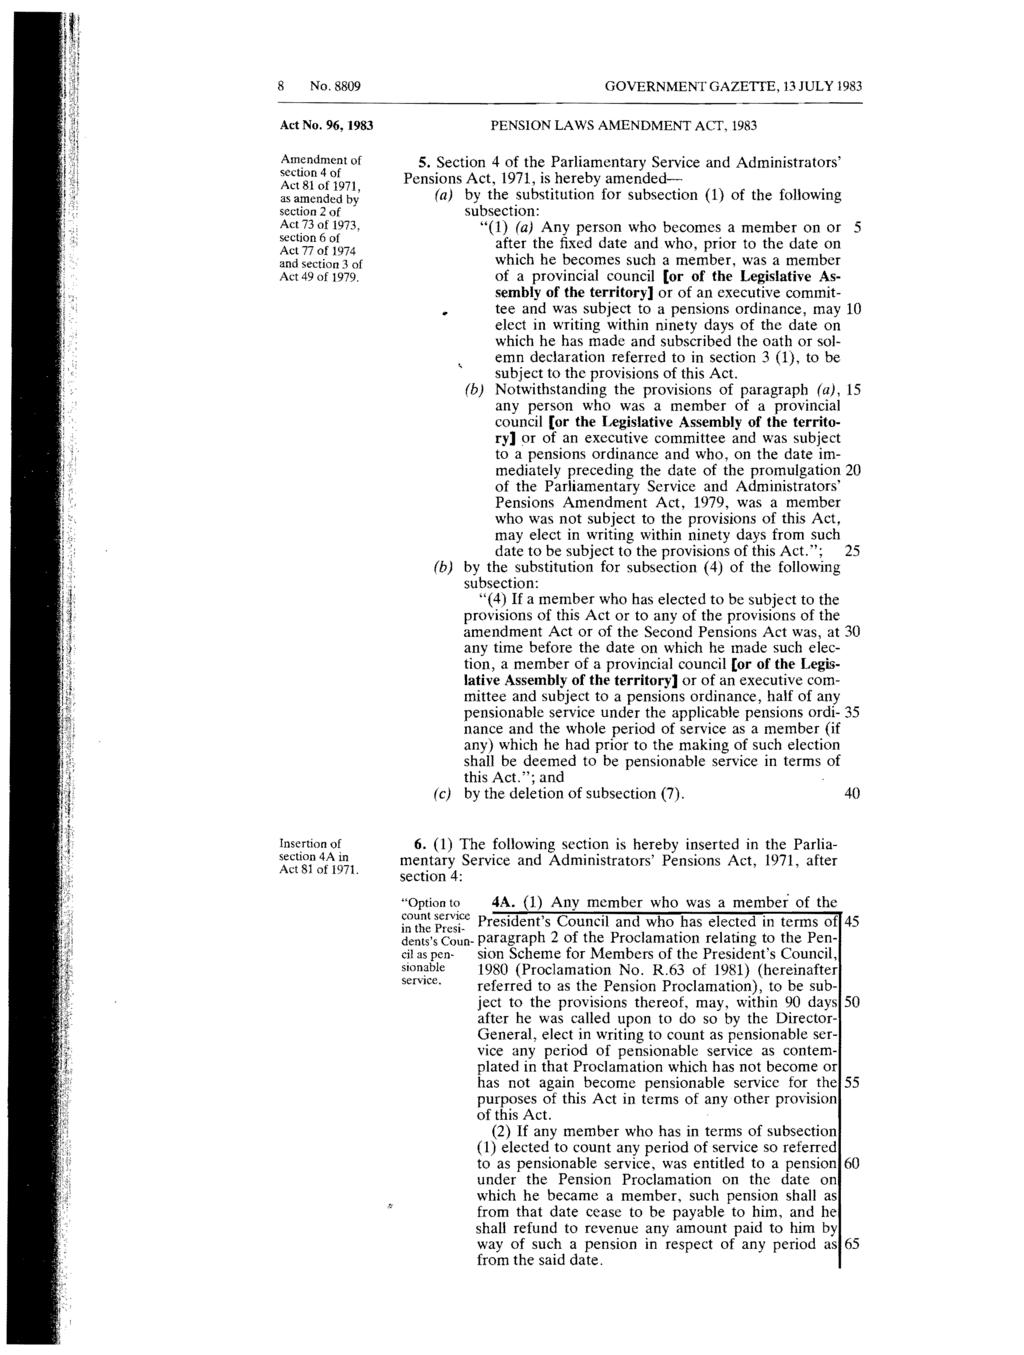 8 No. 8809 GOVERNMENT GAZETTE, 13 JULY 1983 Act No. 96, 1983 section 4 of Act 81 of 1971, as amended by section 2 of Act 73 of 1973. section 6 of. Act 77 of 1974 and section 3 of Act 49 of 1979.